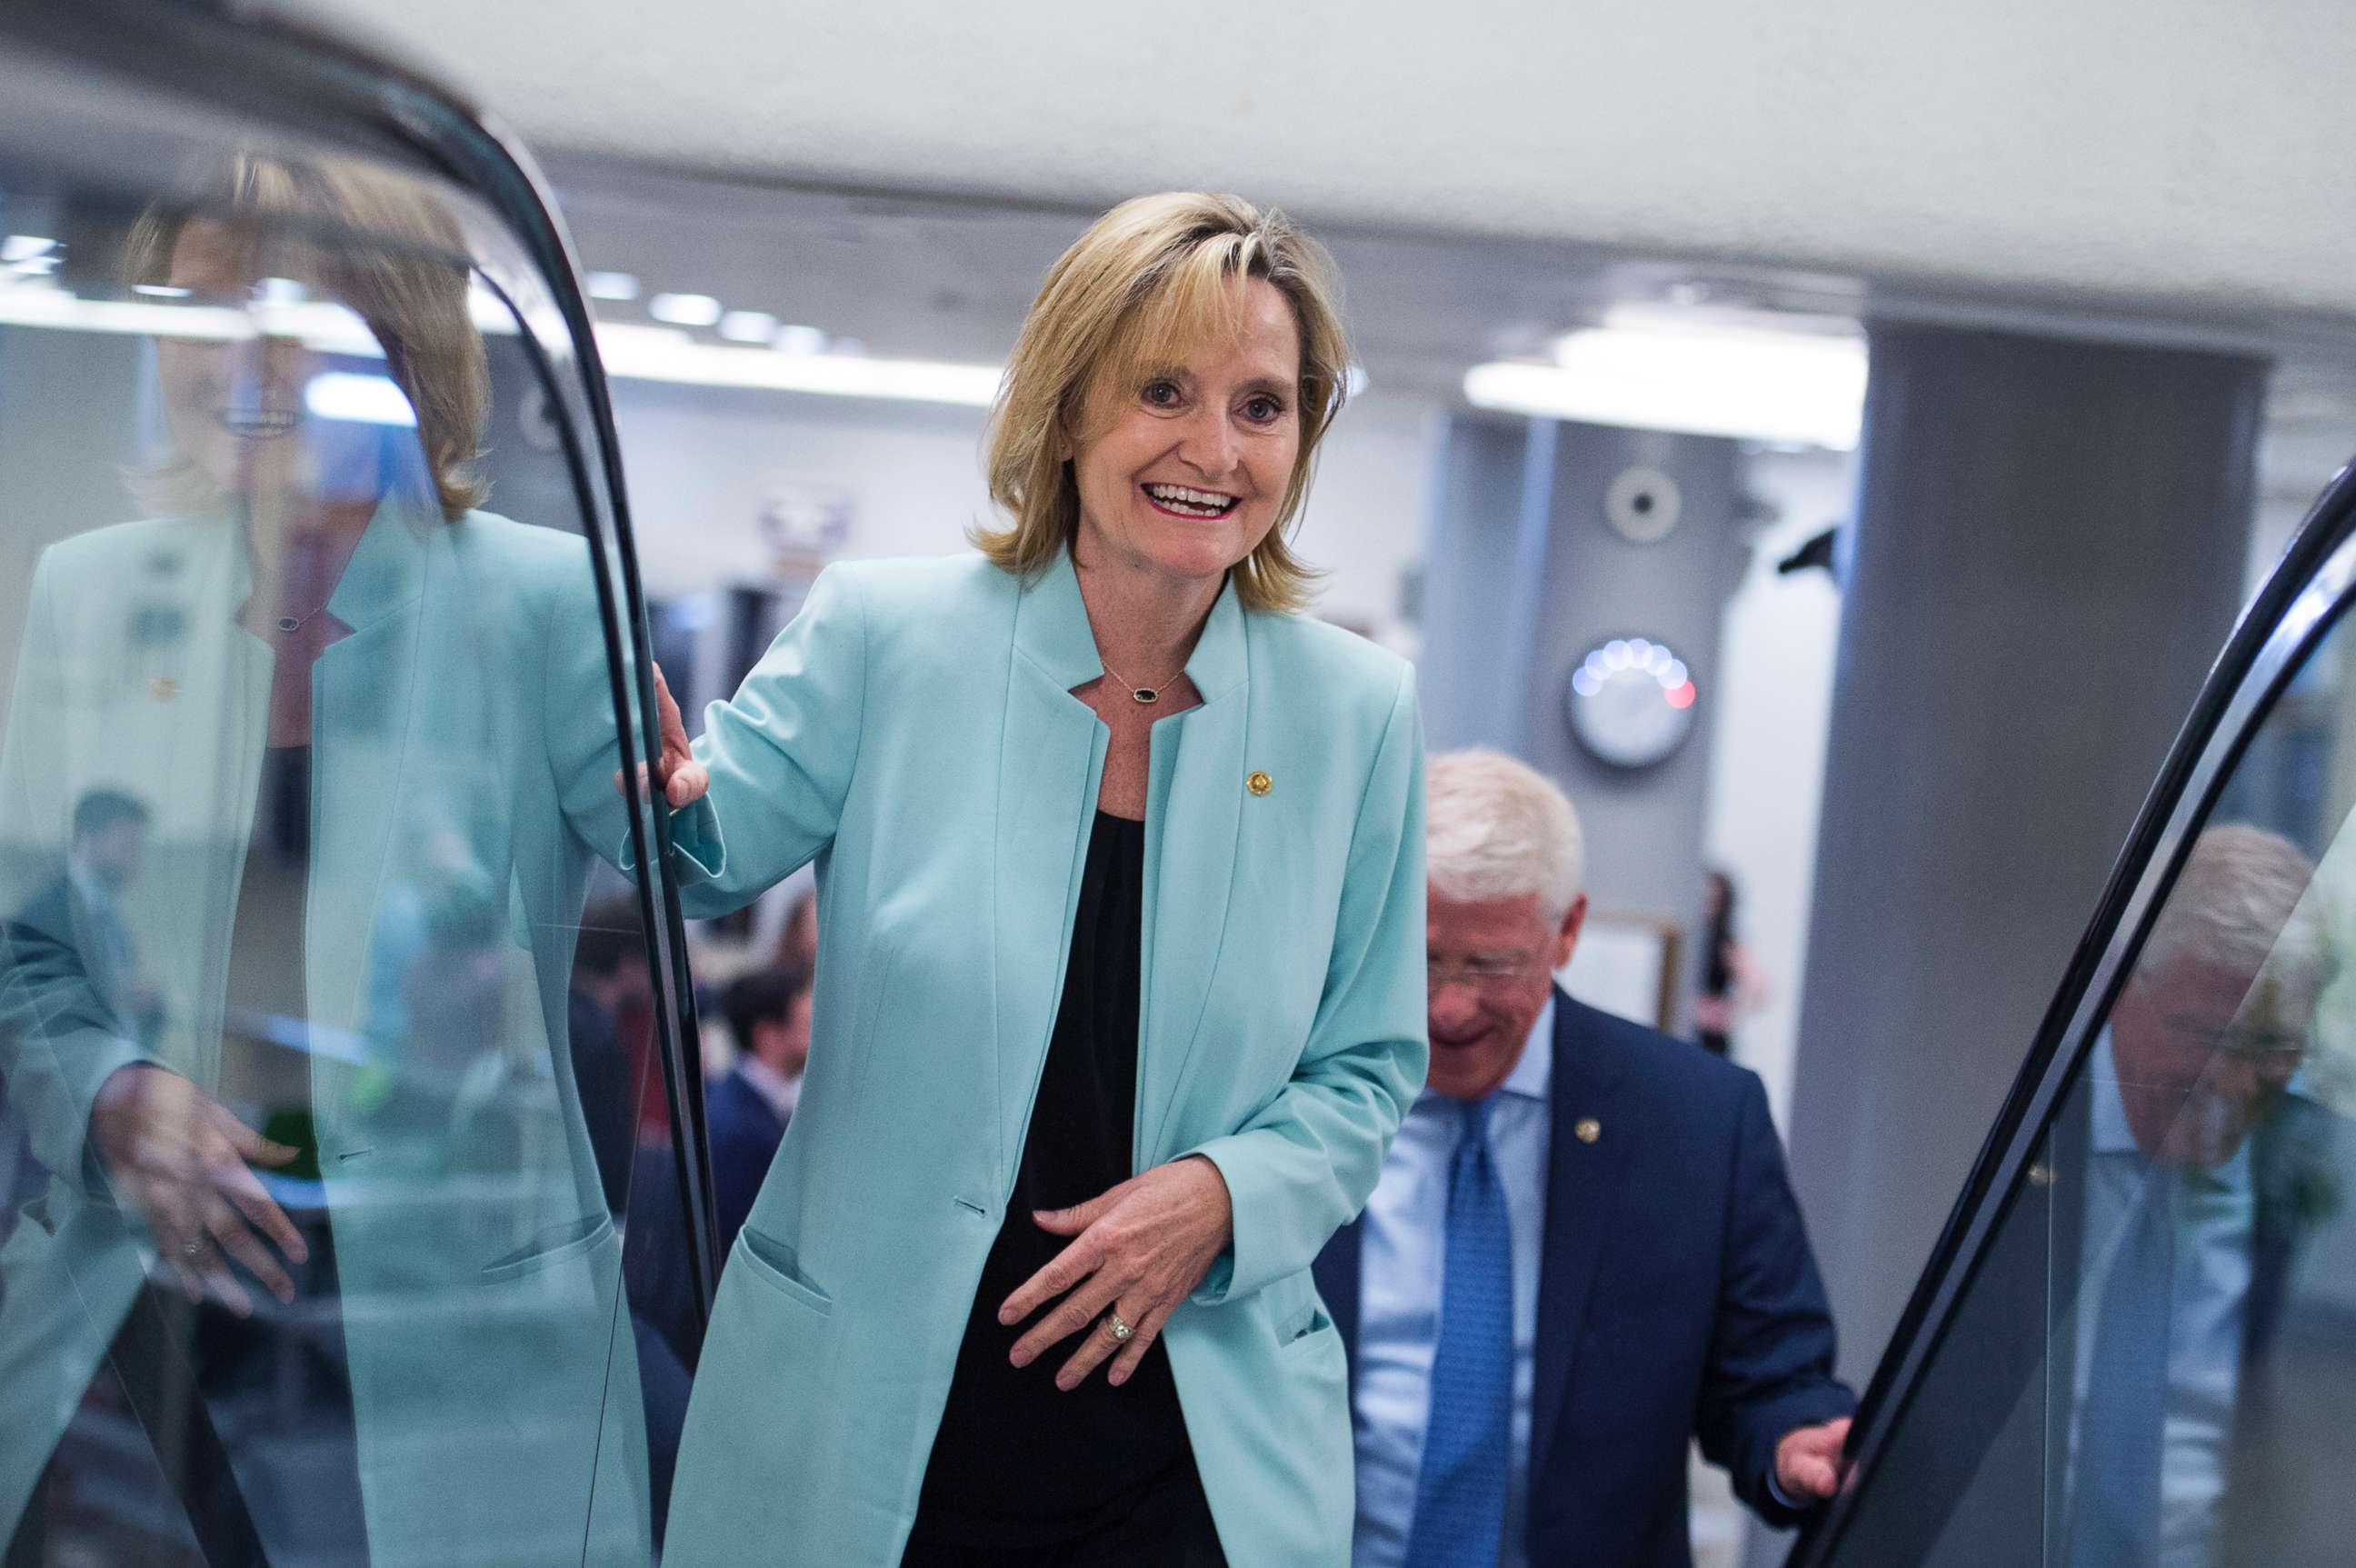 PHOTO: Senator Cindy Hyde-Smith heads to the Senate Policy luncheon in the Capitol, June 26, 2018.